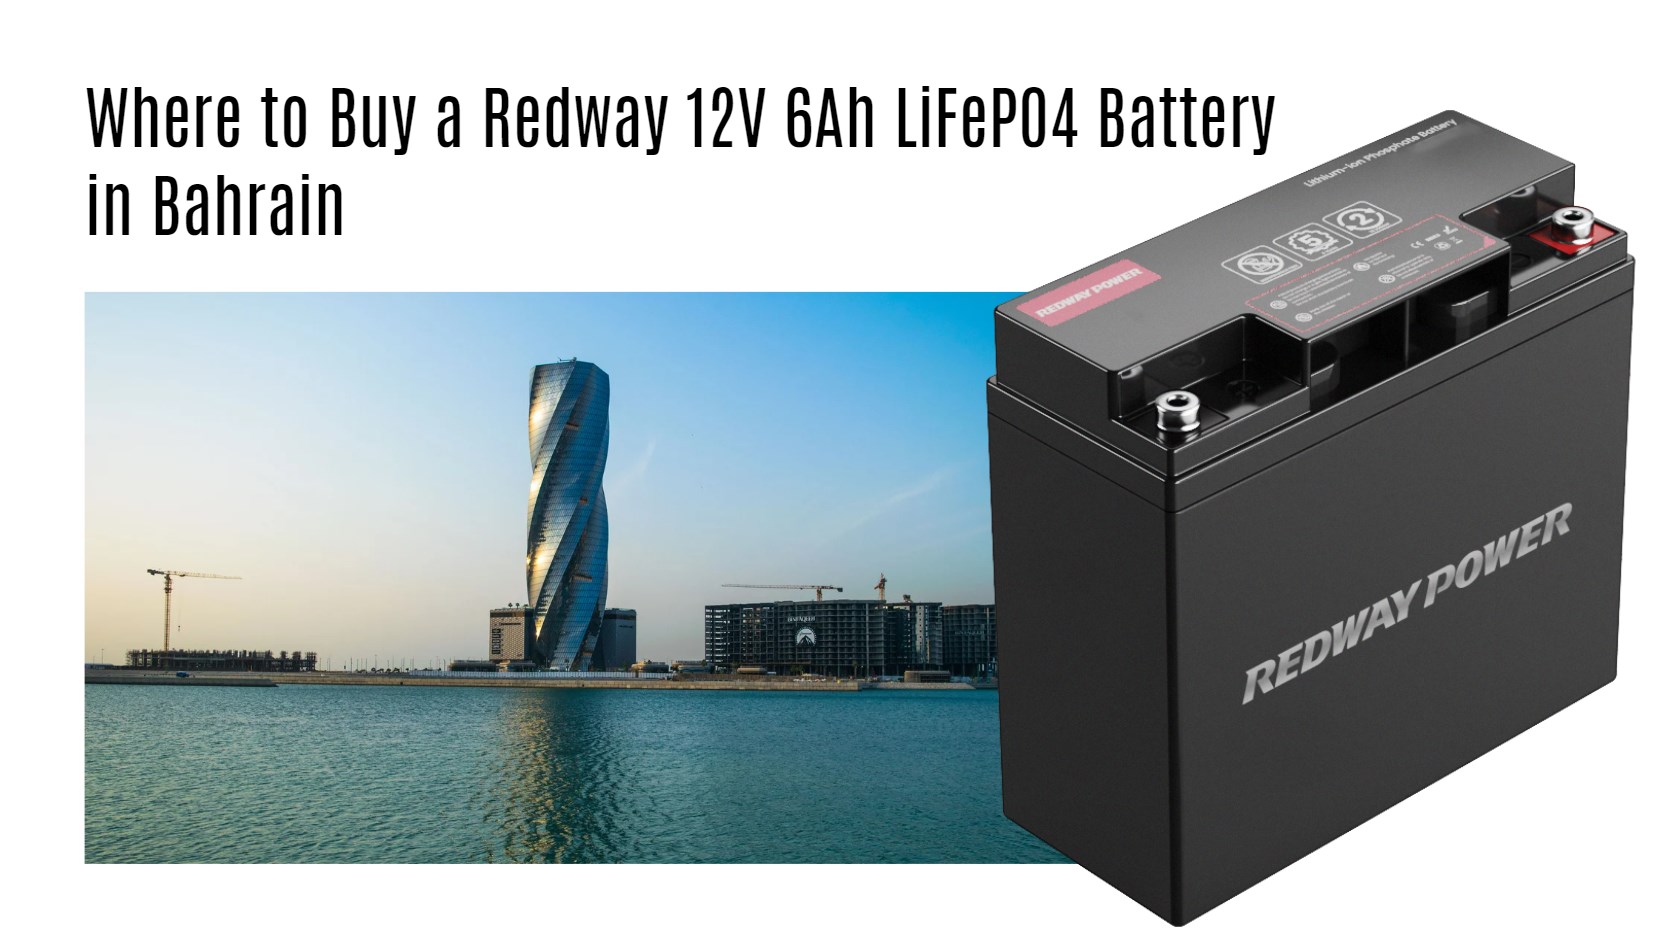 Where to Buy a Redway 12V 6Ah LiFePO4 Battery in Bahrain